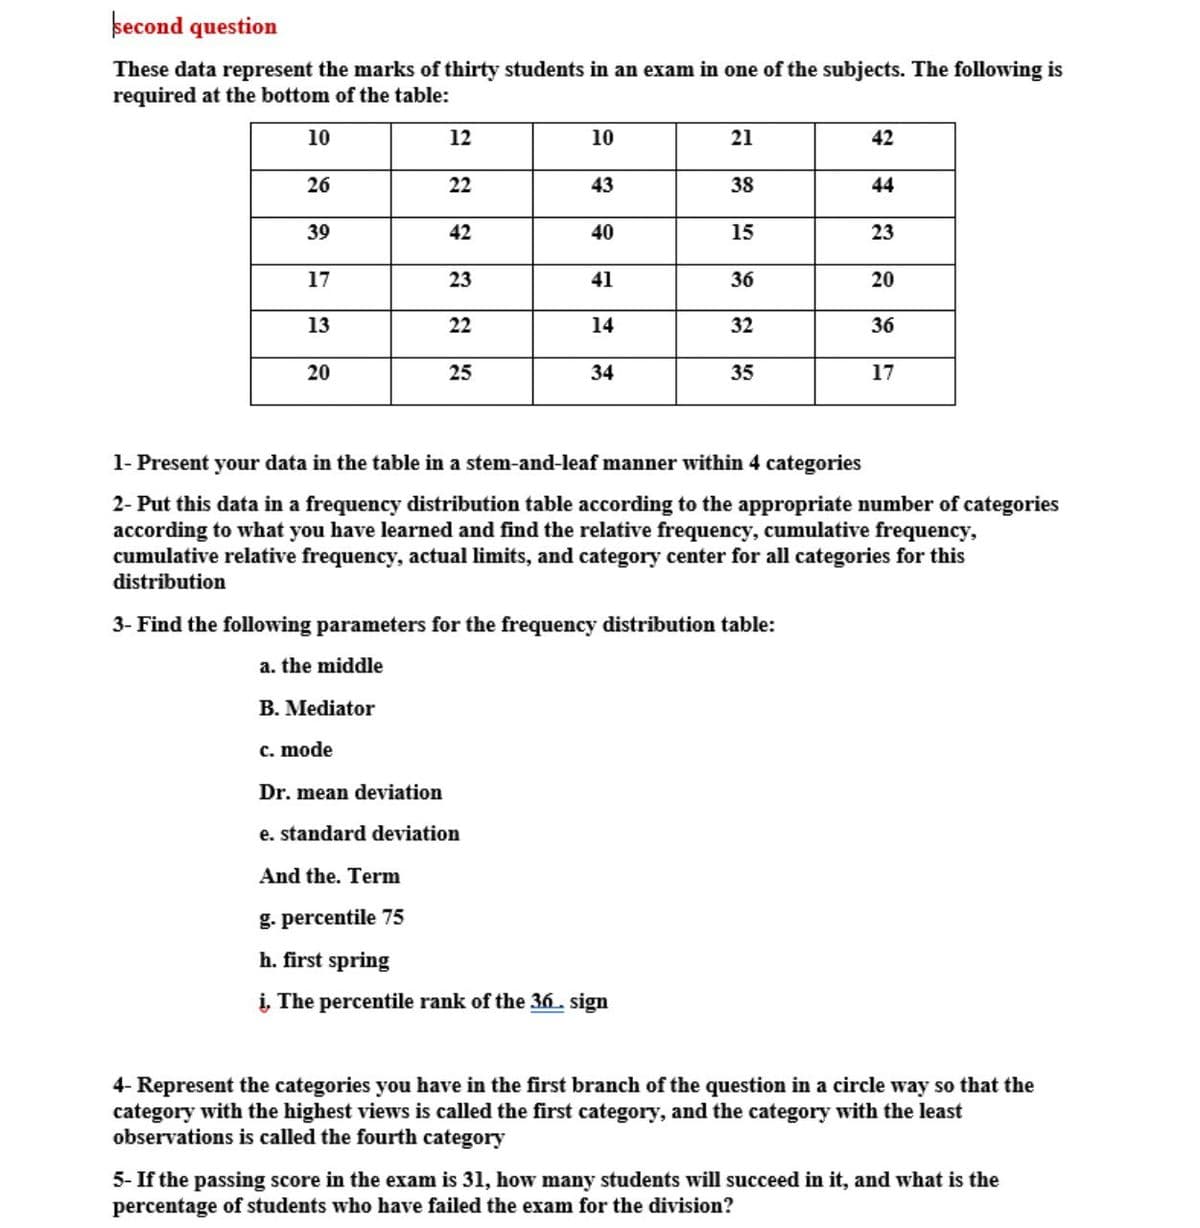 becond question
These data represent the marks of thirty students in an exam in one of the subjects. The following is
required at the bottom of the table:
10
12
10
21
42
26
22
43
38
44
39
42
40
15
23
17
23
41
36
20
13
22
14
32
36
20
25
34
35
17
1- Present your data in the table in a stem-and-leaf manner within 4 categories
2- Put this data in a frequency distribution table according to the appropriate number of categories
according to what you have learned and find the relative frequency, cumulative frequency,
cumulative relative frequency, actual limits, and category center for all categories for this
distribution
3- Find the following parameters for the frequency distribution table:
a. the middle
B. Mediator
c. mode
Dr. mean deviation
e. standard deviation
And the. Term
g. percentile 75
h. first spring
į, The percentile rank of the 36. sign
4- Represent the categories you have in the first branch of the question in a circle way so that the
category with the highest views is called the first category, and the category with the least
observations is called the fourth category
5- If the passing score in the exam is 31, how many students will succeed in it, and what is the
percentage of students who have failed the exam for the division?
